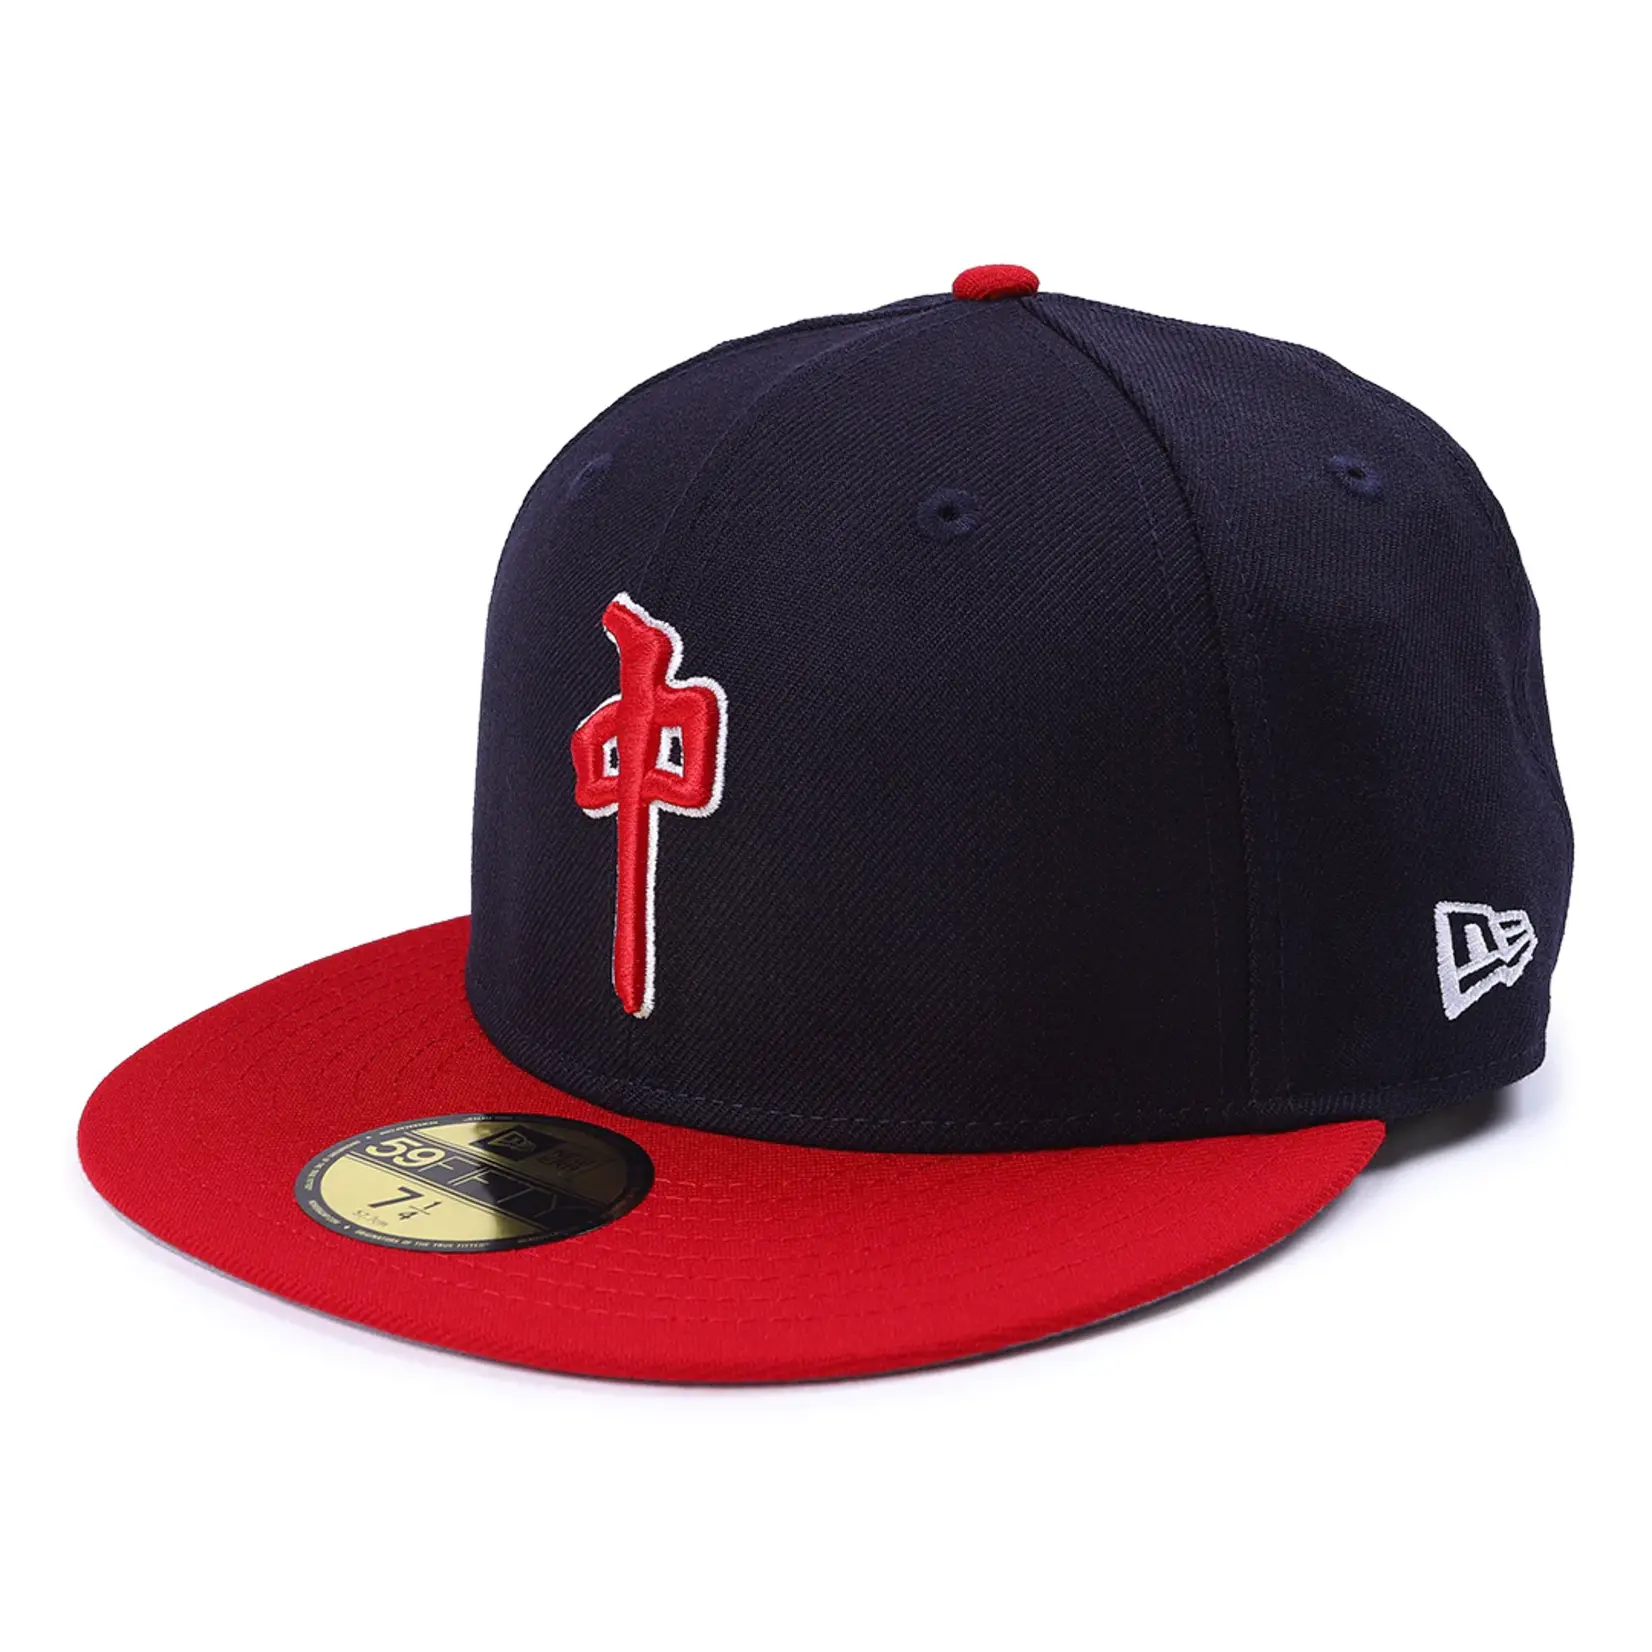 RDS RDS New Era Dynasty Hat - Navy/Red